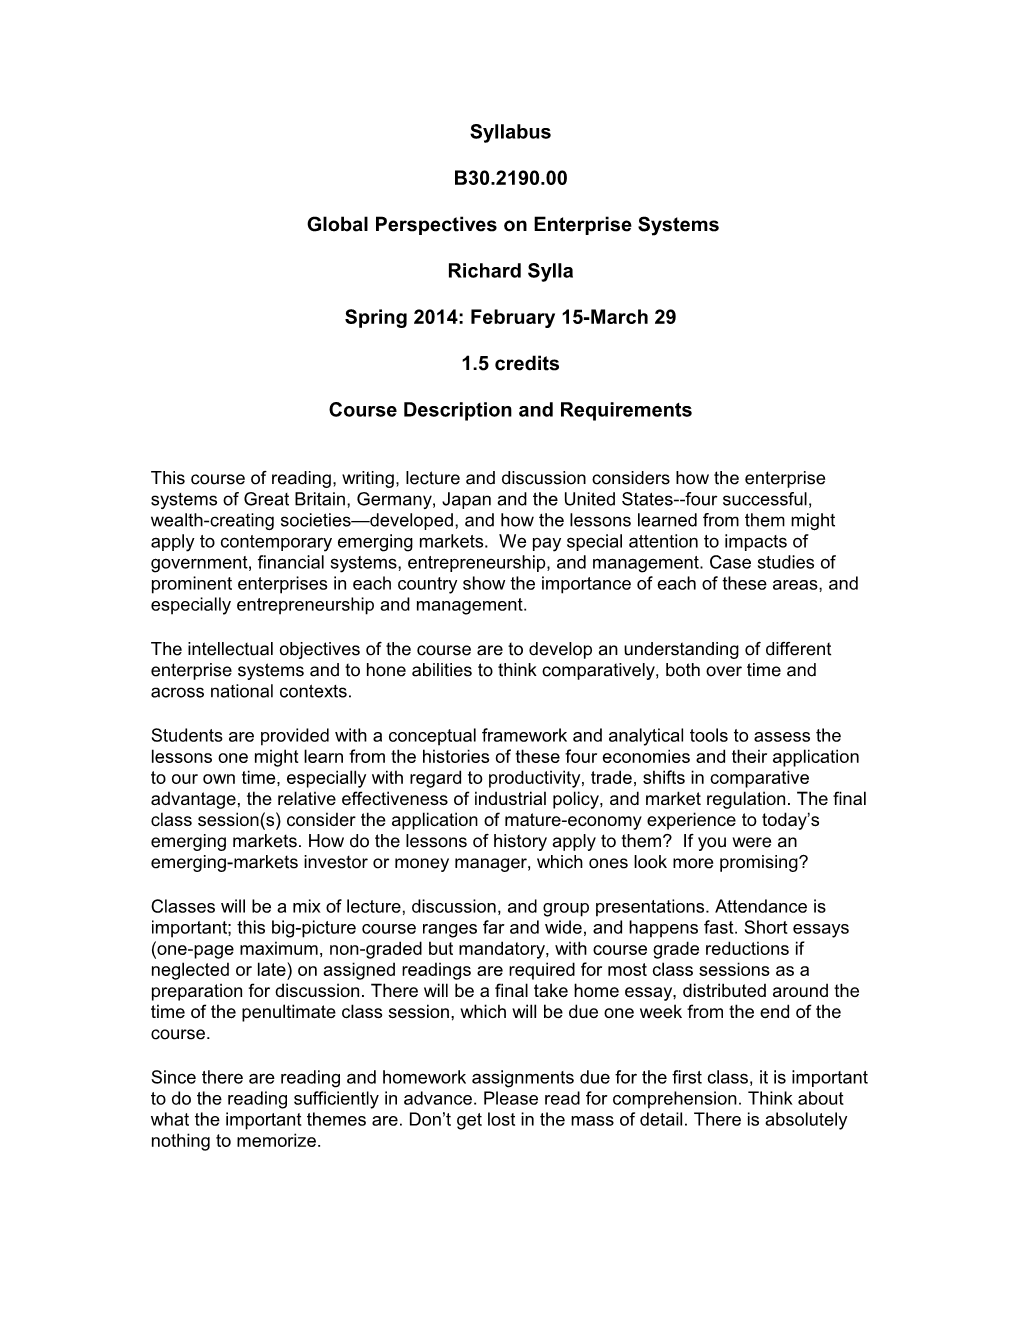 Global Perspectives on Enterprise Systems